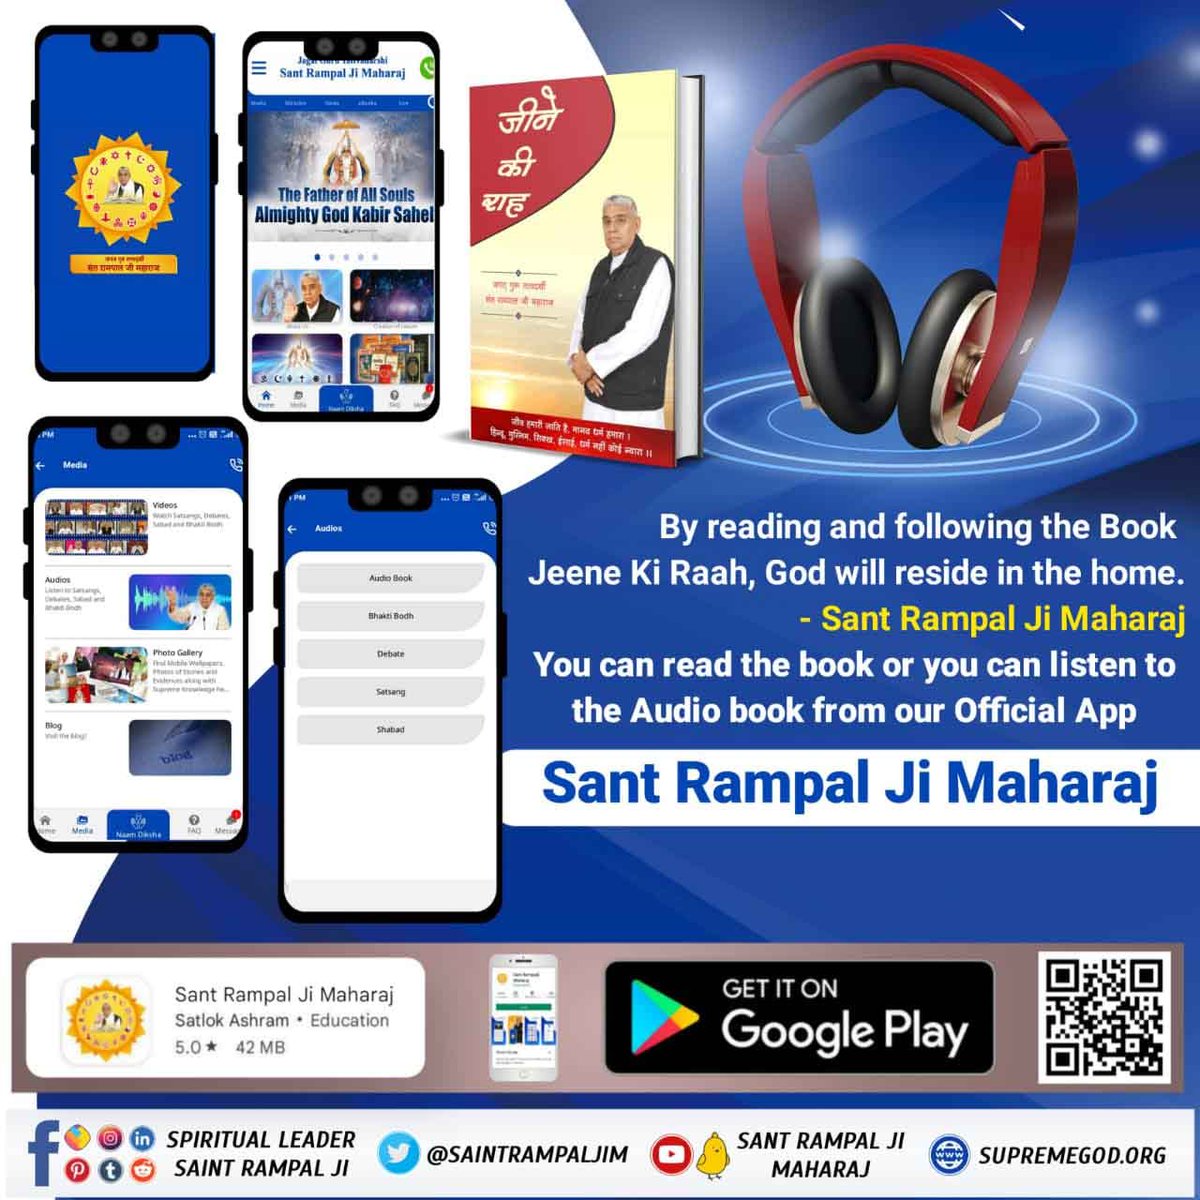 #Allah_Is_Kabir
#noidagbnup16
By reading and following the Book Jeene Ki Raah, God will reside in the home.Sant Rampal Ji Maharaj You can read the book or you can listen to the Audio book from our Official App
Sant Rampal Ji Maharaj
Get Free Books +91 7496801825